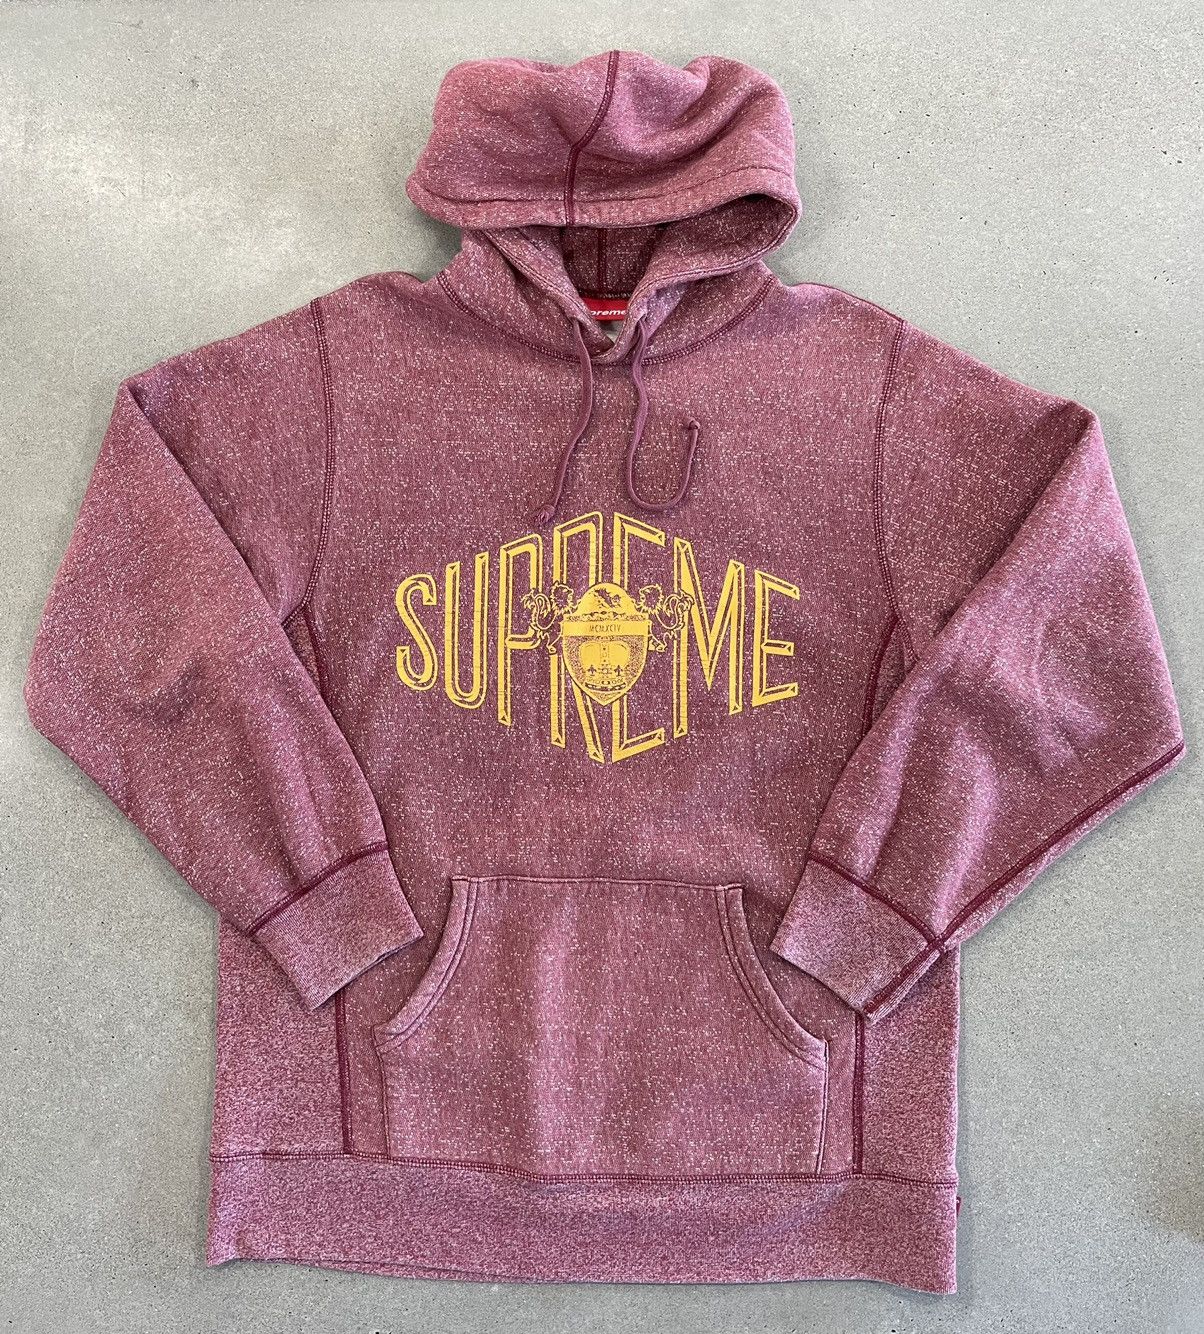 Supreme RARE: F/W 2011 Supreme Imperial Hoodie "Red Heather" Size US XL / EU 56 / 4 - 2 Preview